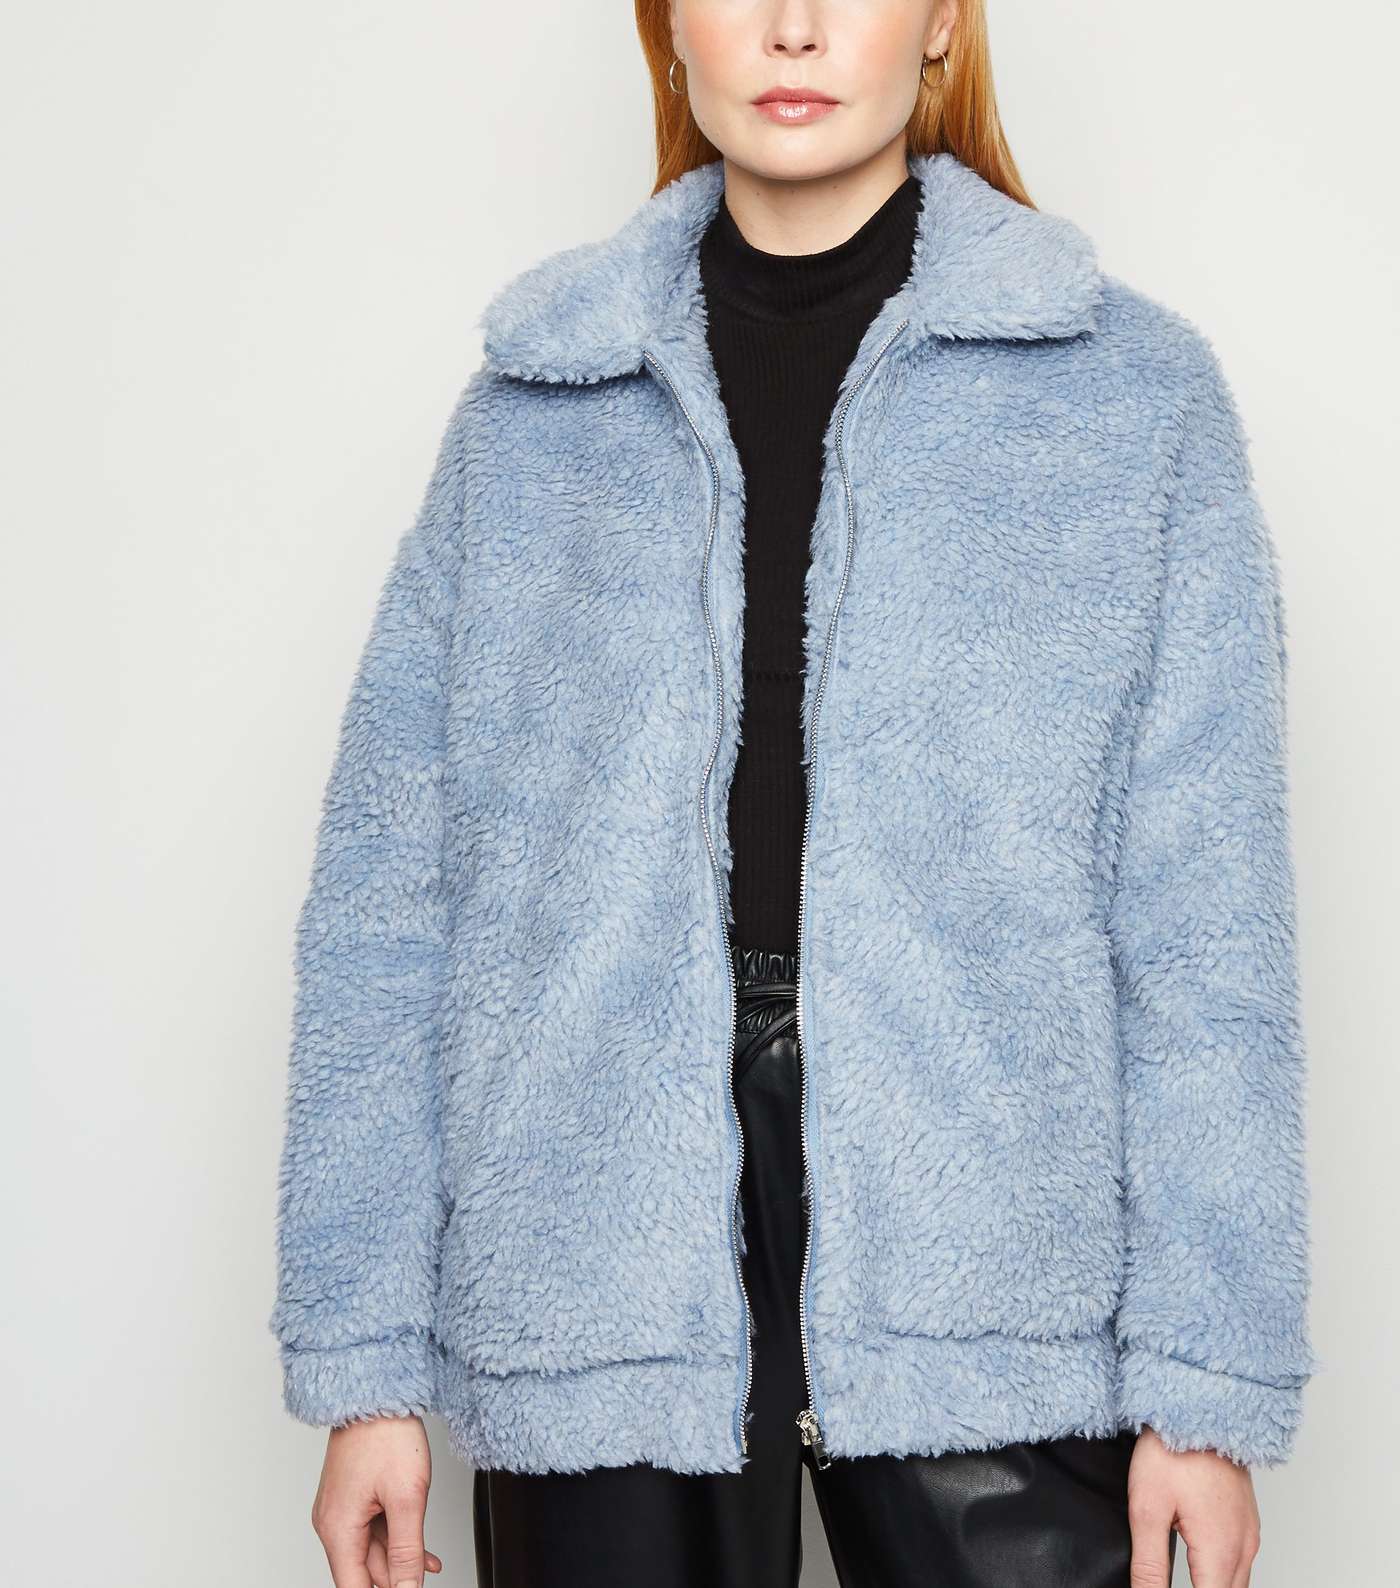 Cameo Rose Pale Blue Teddy Bomber Jacket